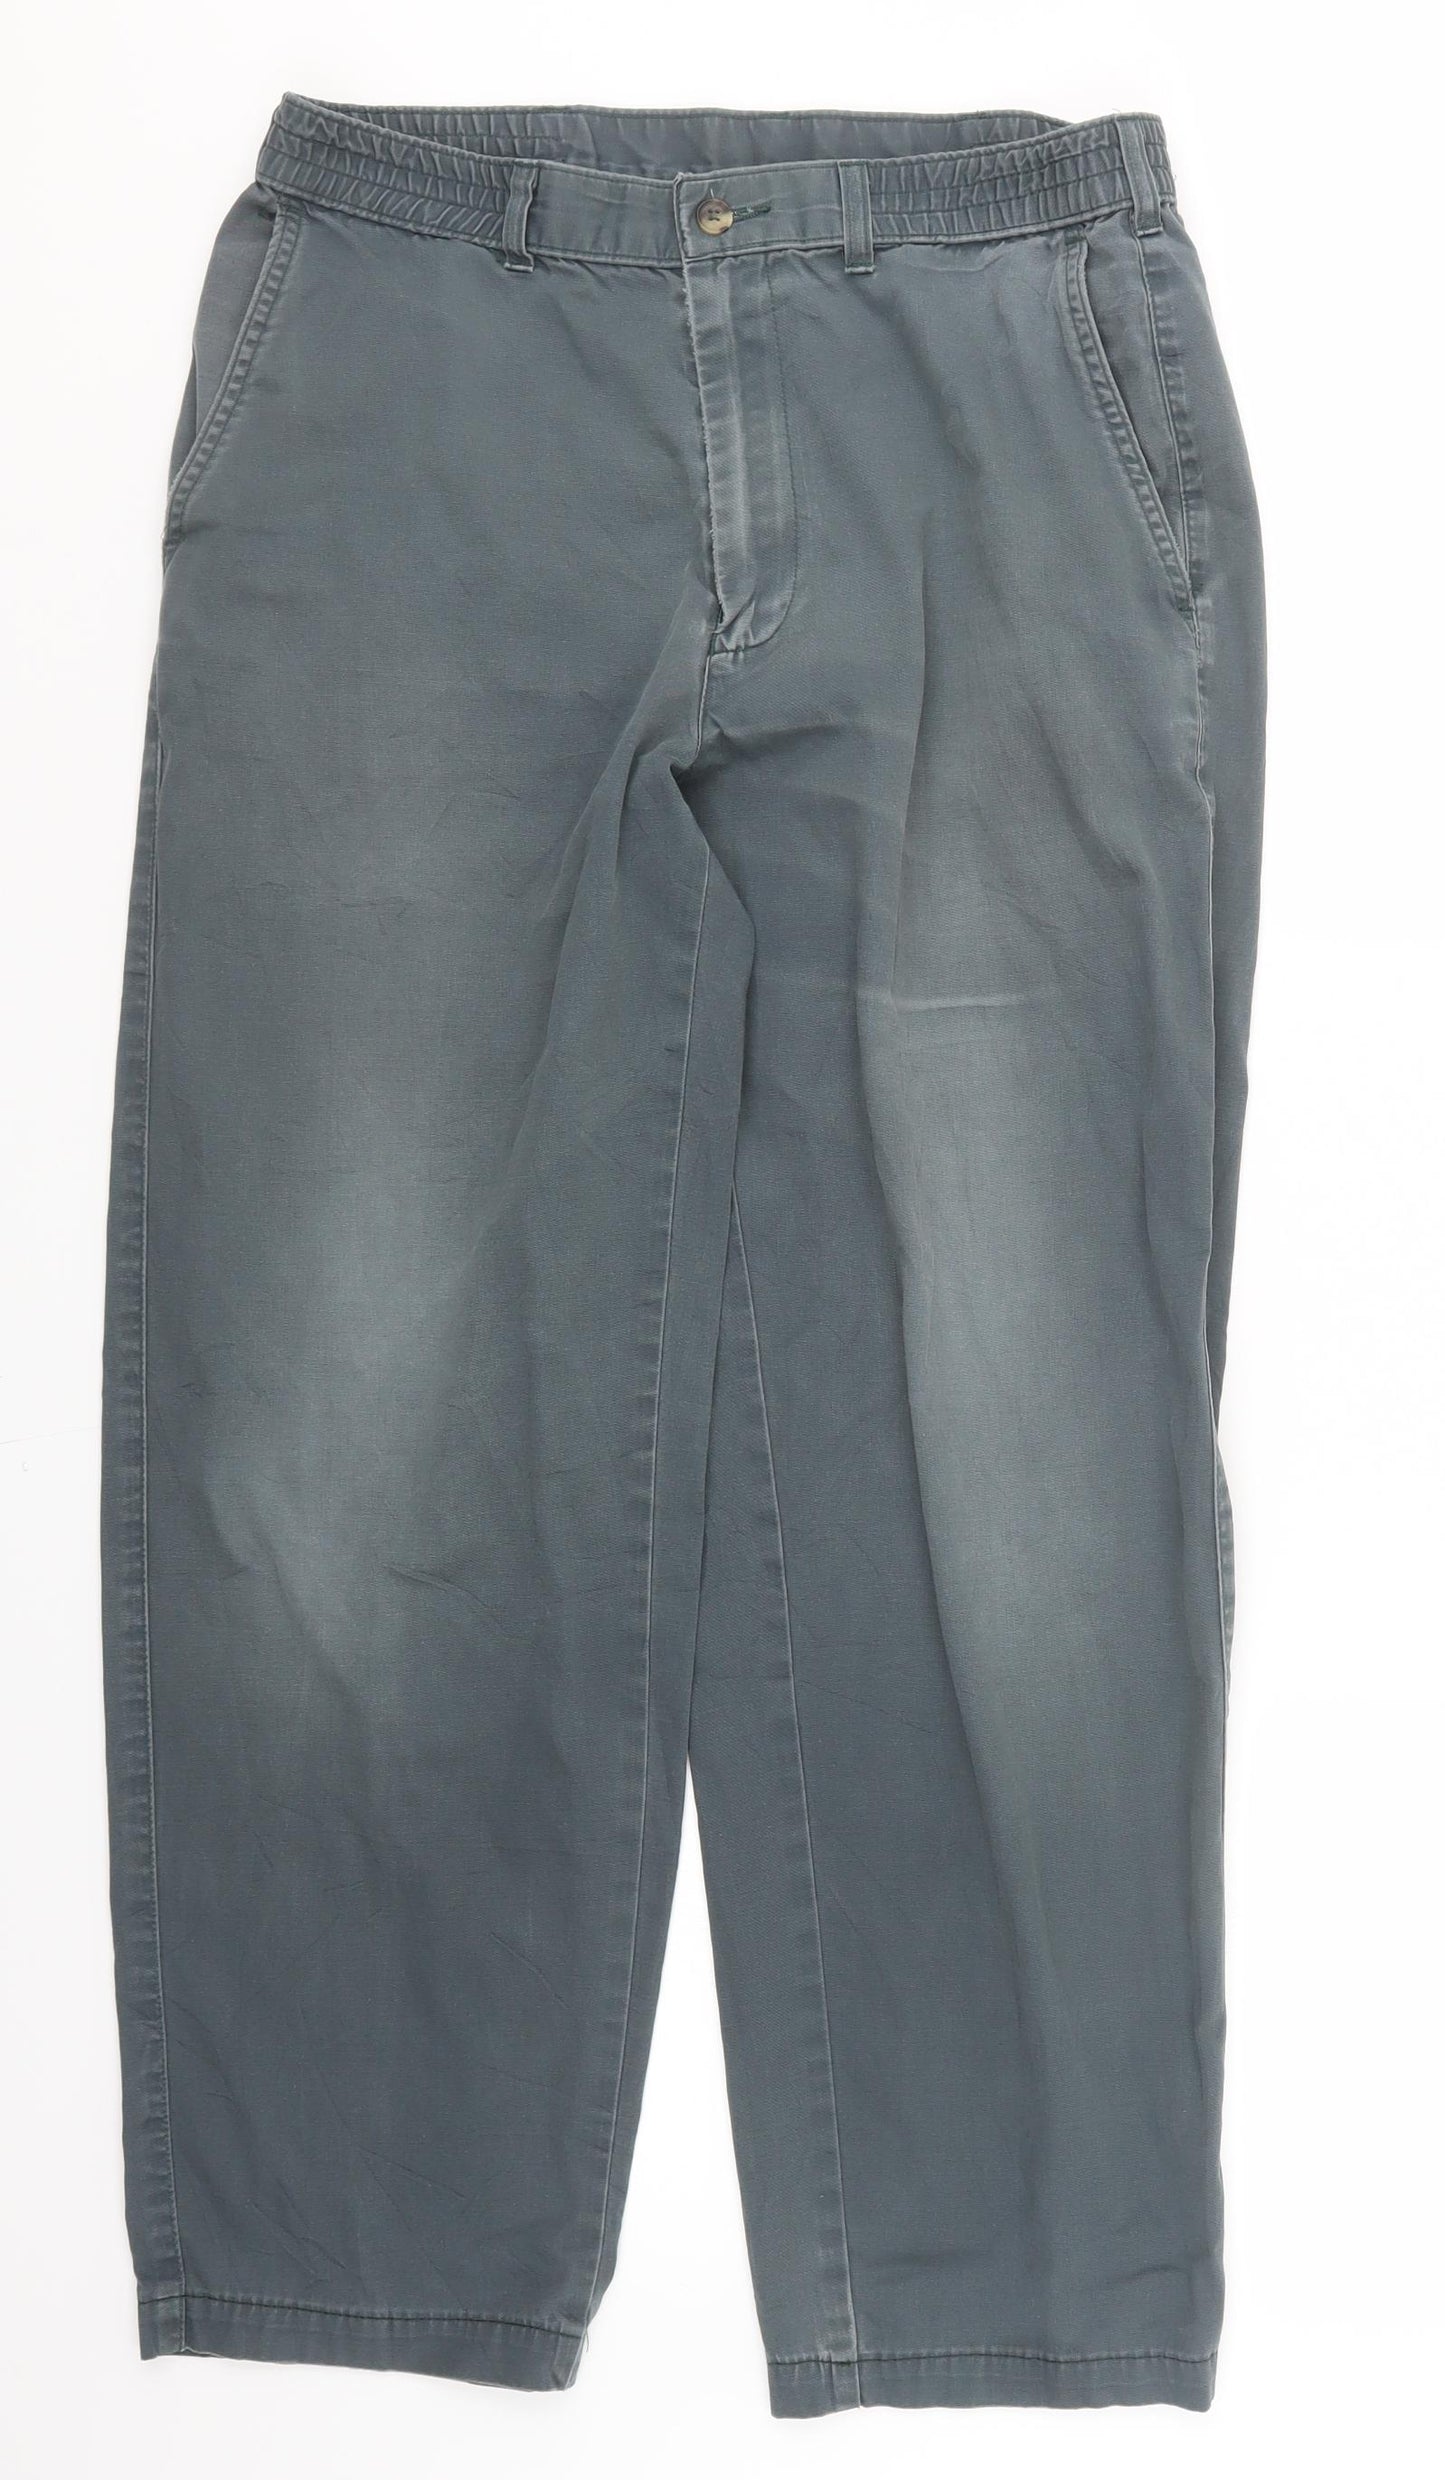 M&S Mens Grey   Trousers   L31 in